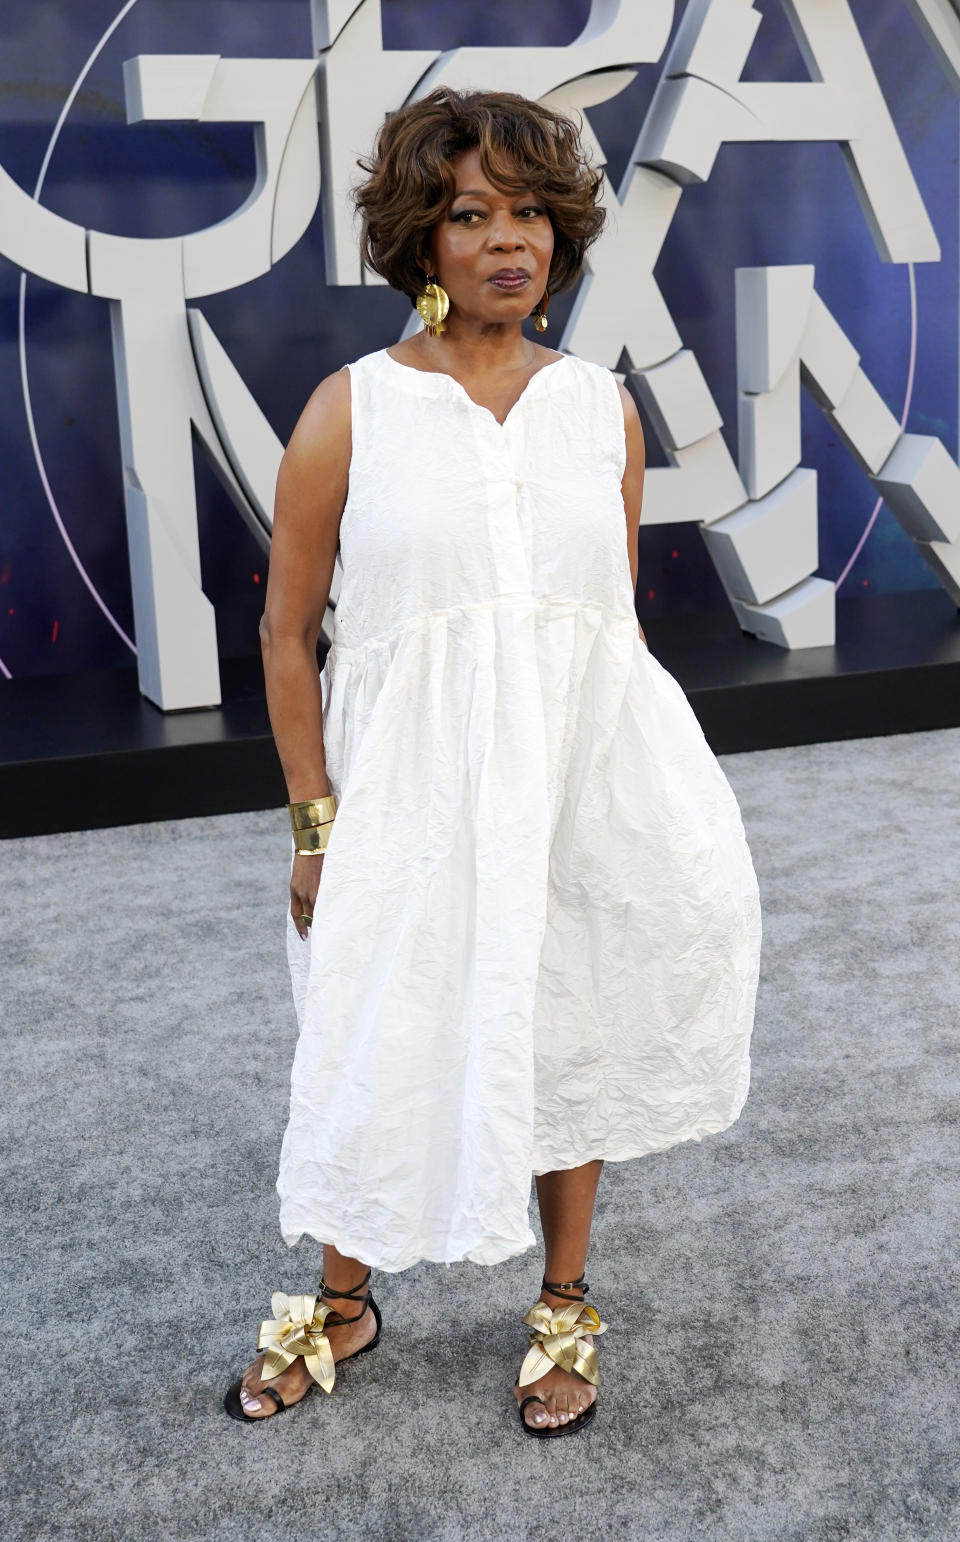 FILE - Alfre Woodard, a cast member in "The Gray Man," poses at the premiere of the Netflix film, Wednesday, July 13, 2022, at the TCL Chinese Theatre in Los Angeles. Woodard turns 70 on Nov. 8. (AP Photo/Chris Pizzello, File)